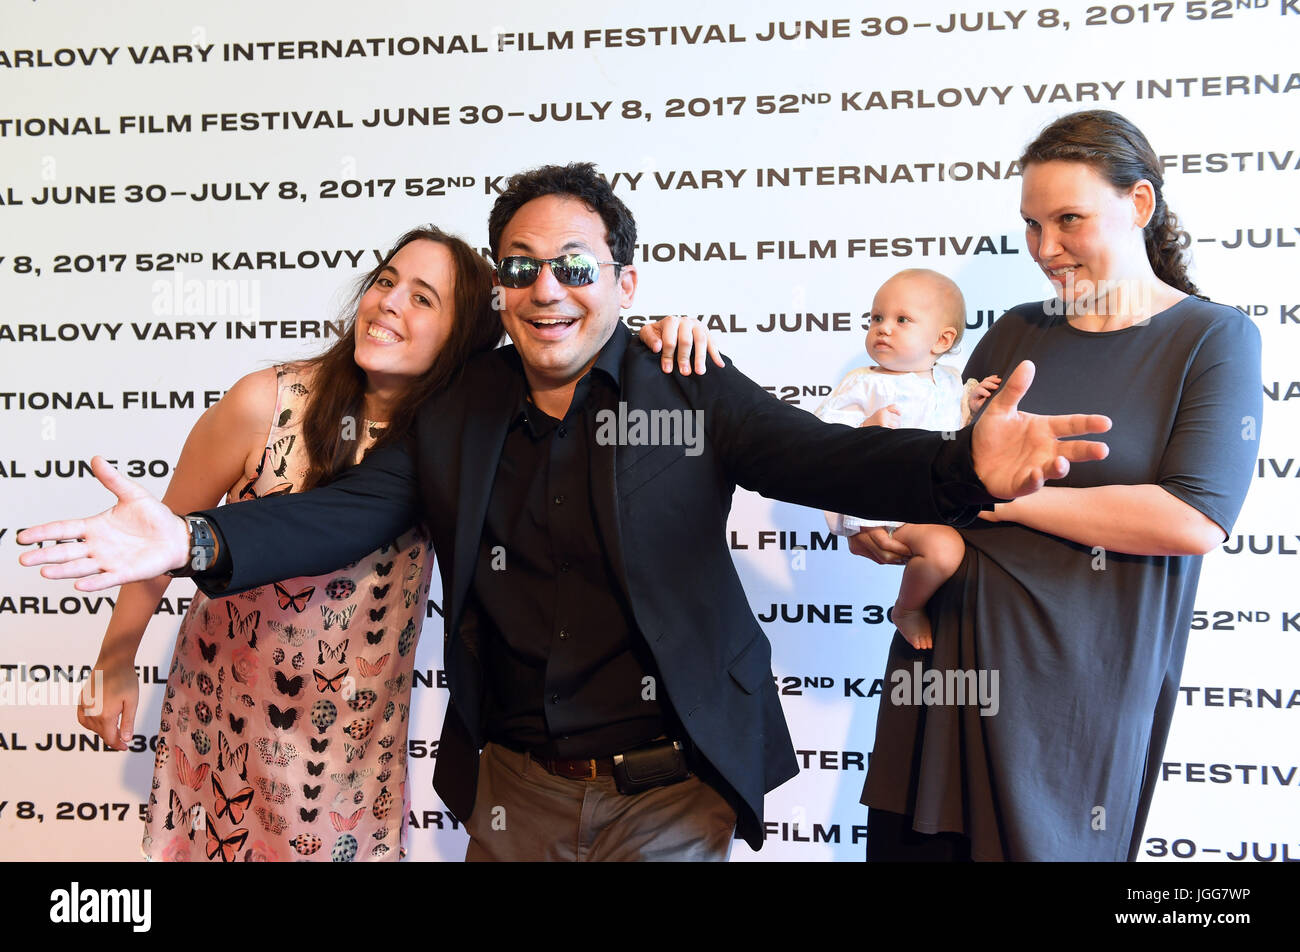 Karlovy Vary, Czech Republic. 06th July, 2017. Actress Samantha Elisofon (left), actor Brandon Polansky (center) and director Rachel Israel introduce the American film Keep the Change during the 52nd International Film Festival in Karlovy Vary, Czech Republic, on July 6, 2017. Credit: Katerina Sulova/CTK Photo/Alamy Live News Stock Photo